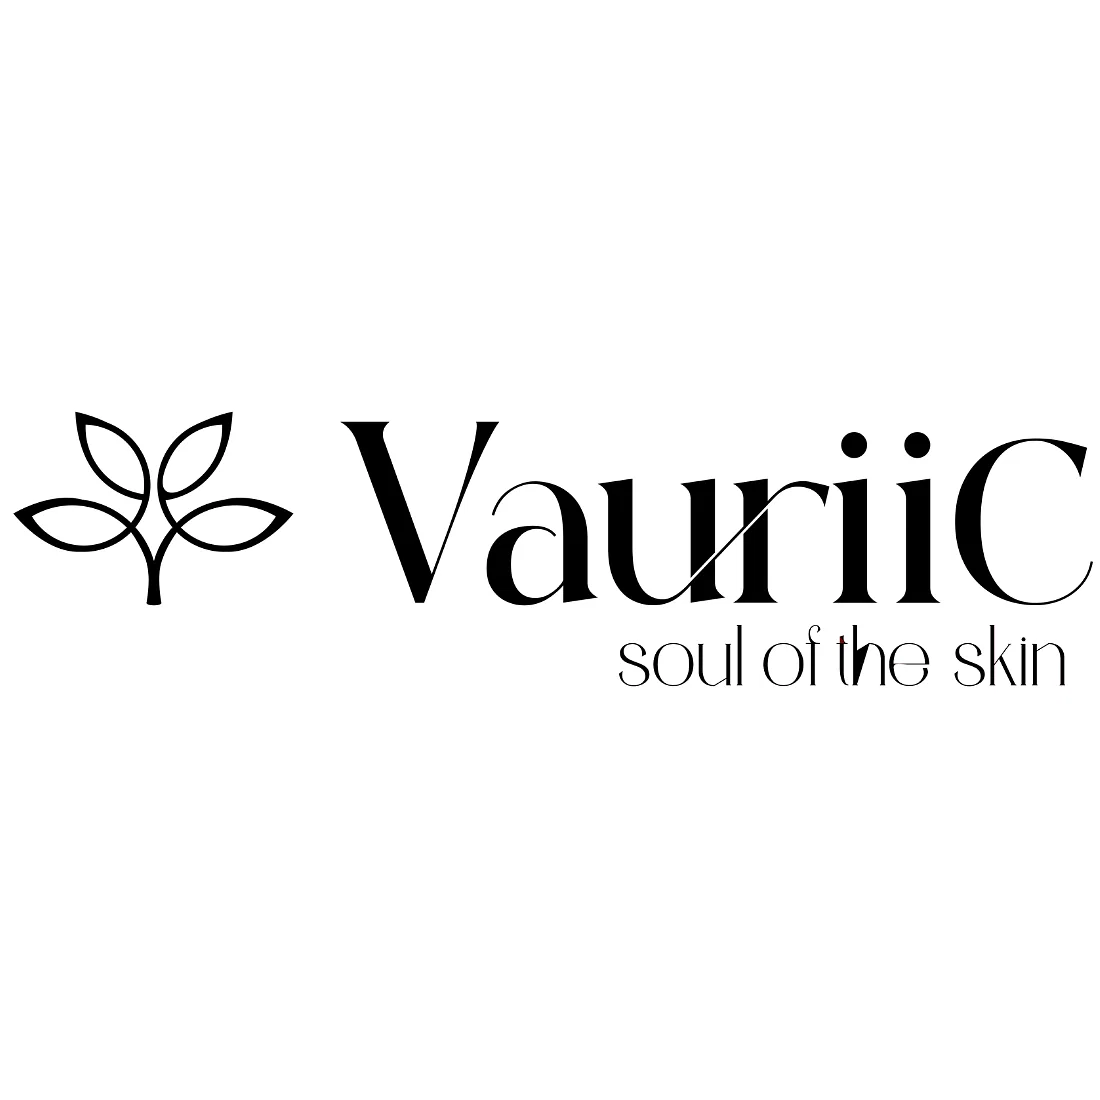 vauriic2912 Profile Picture